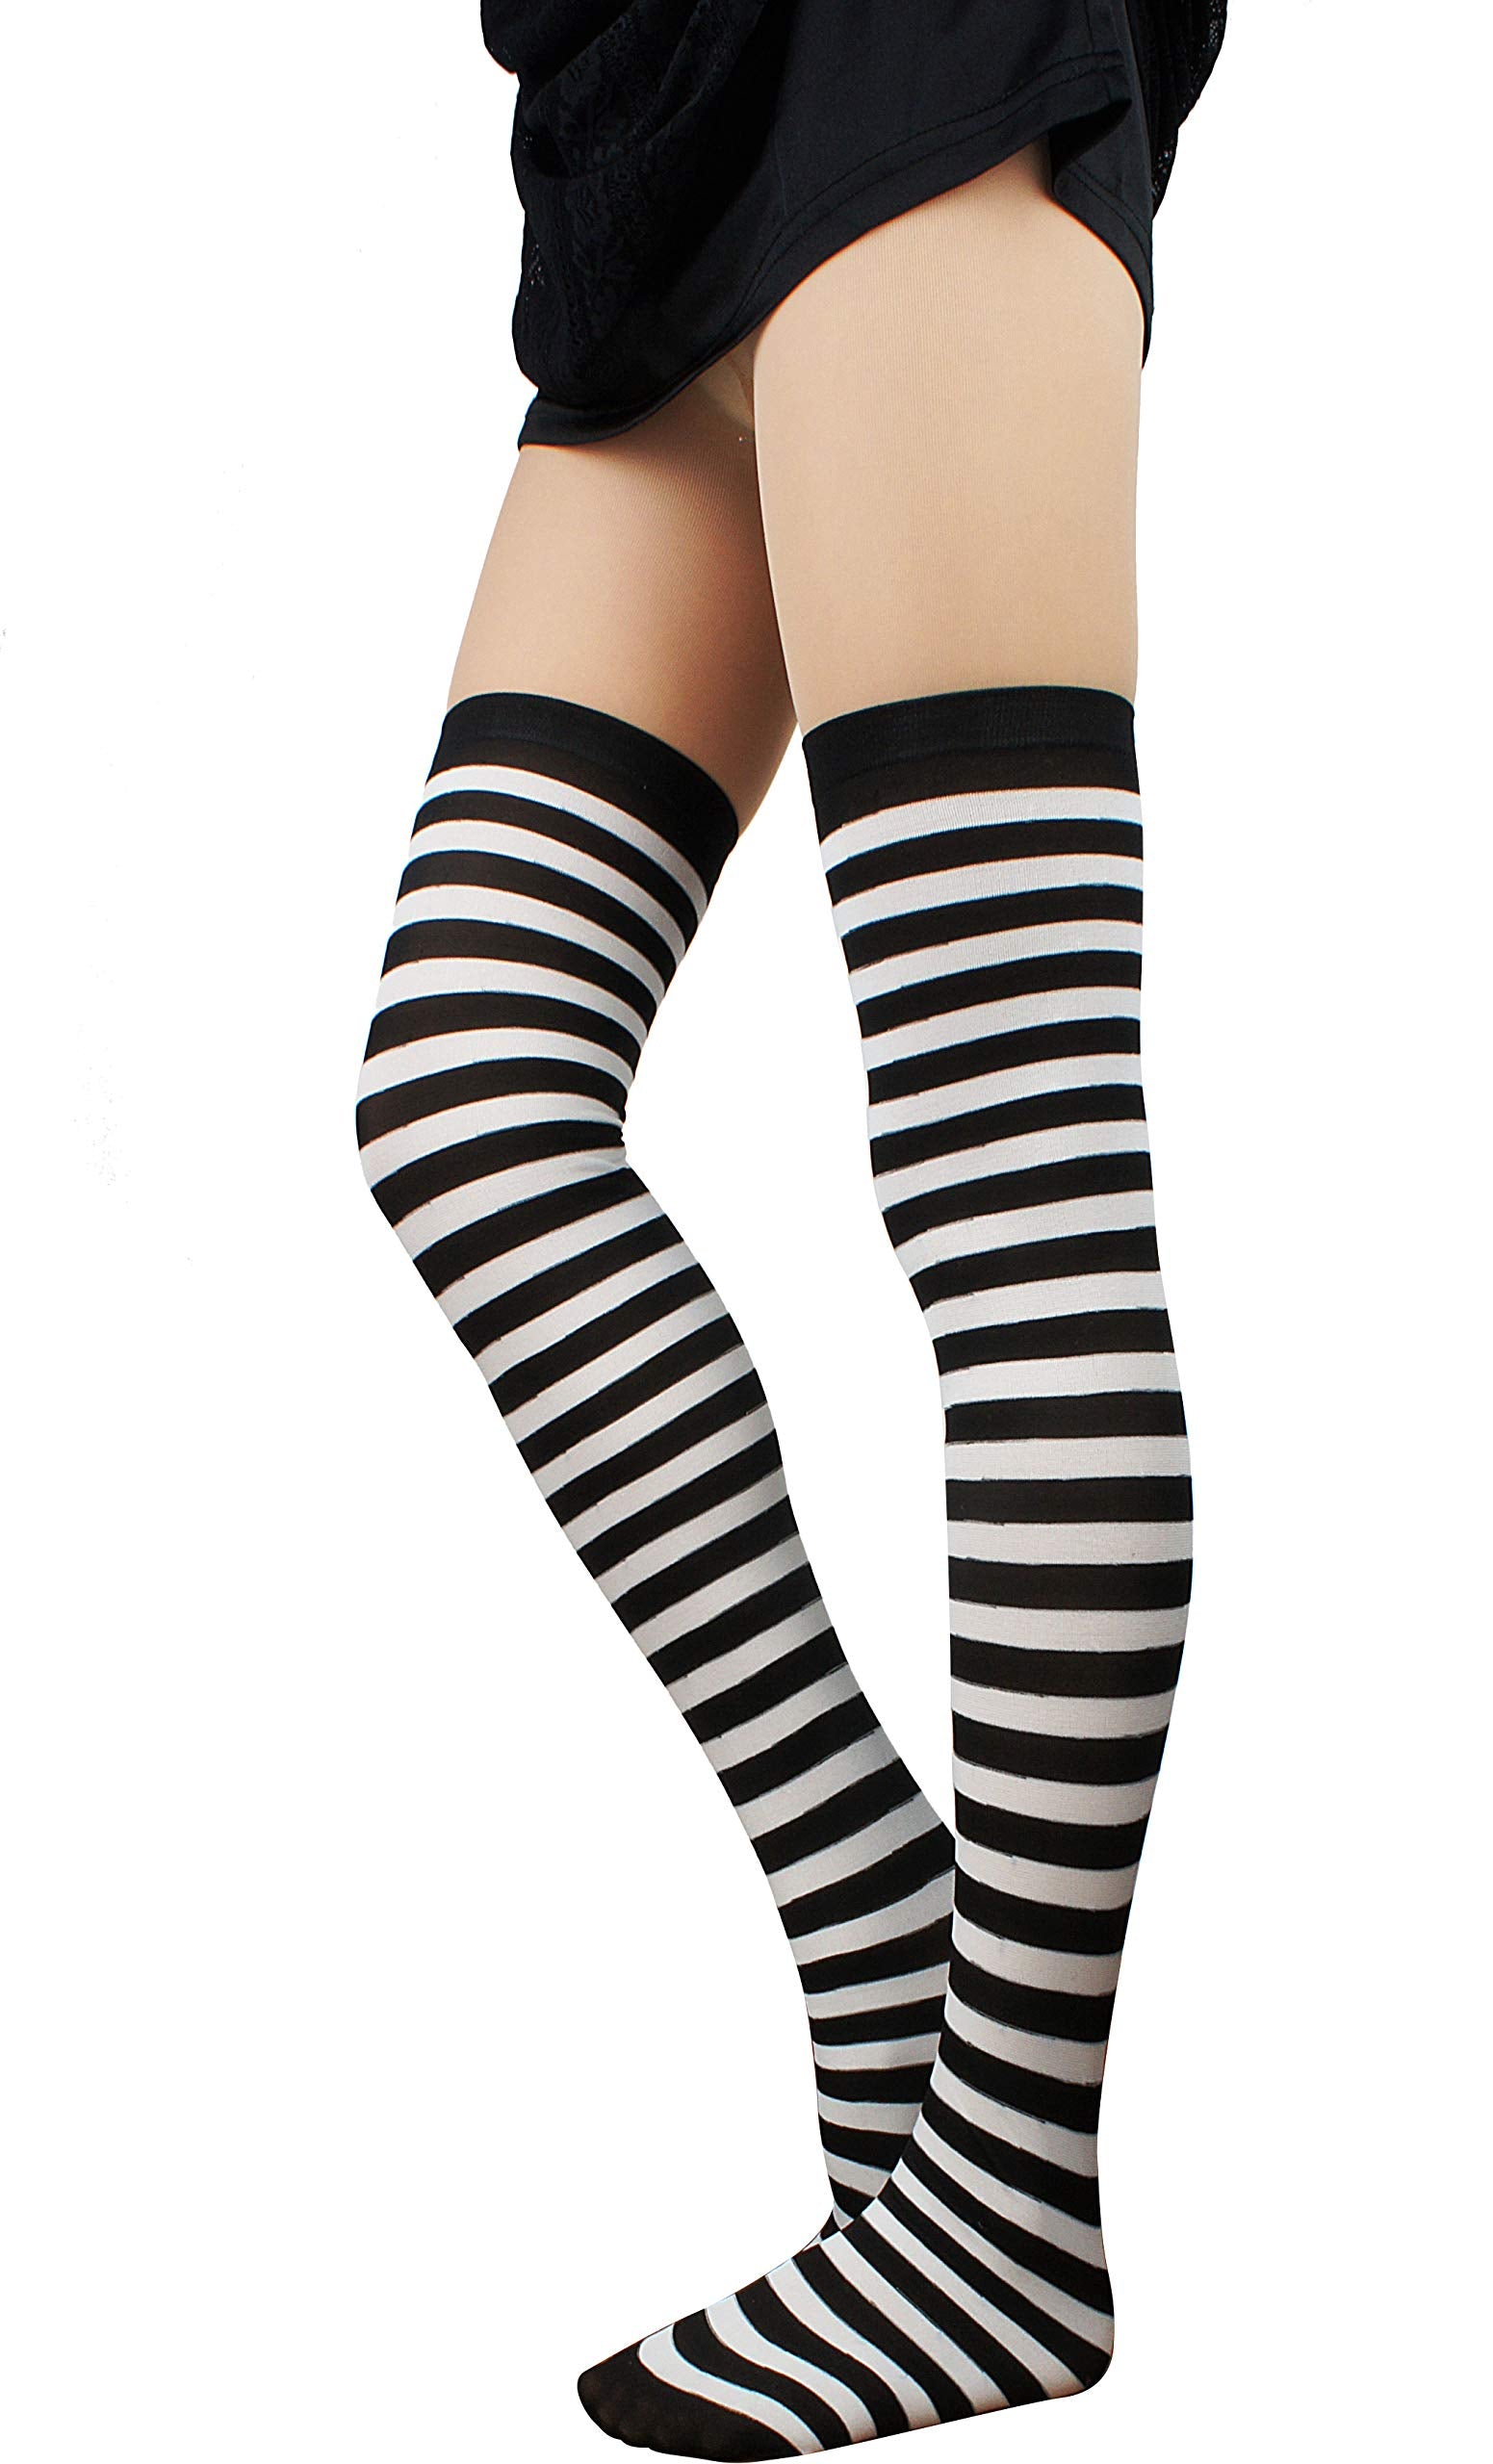 Women's Extra Long Striped Socks Over Knee High Opaque Stockings